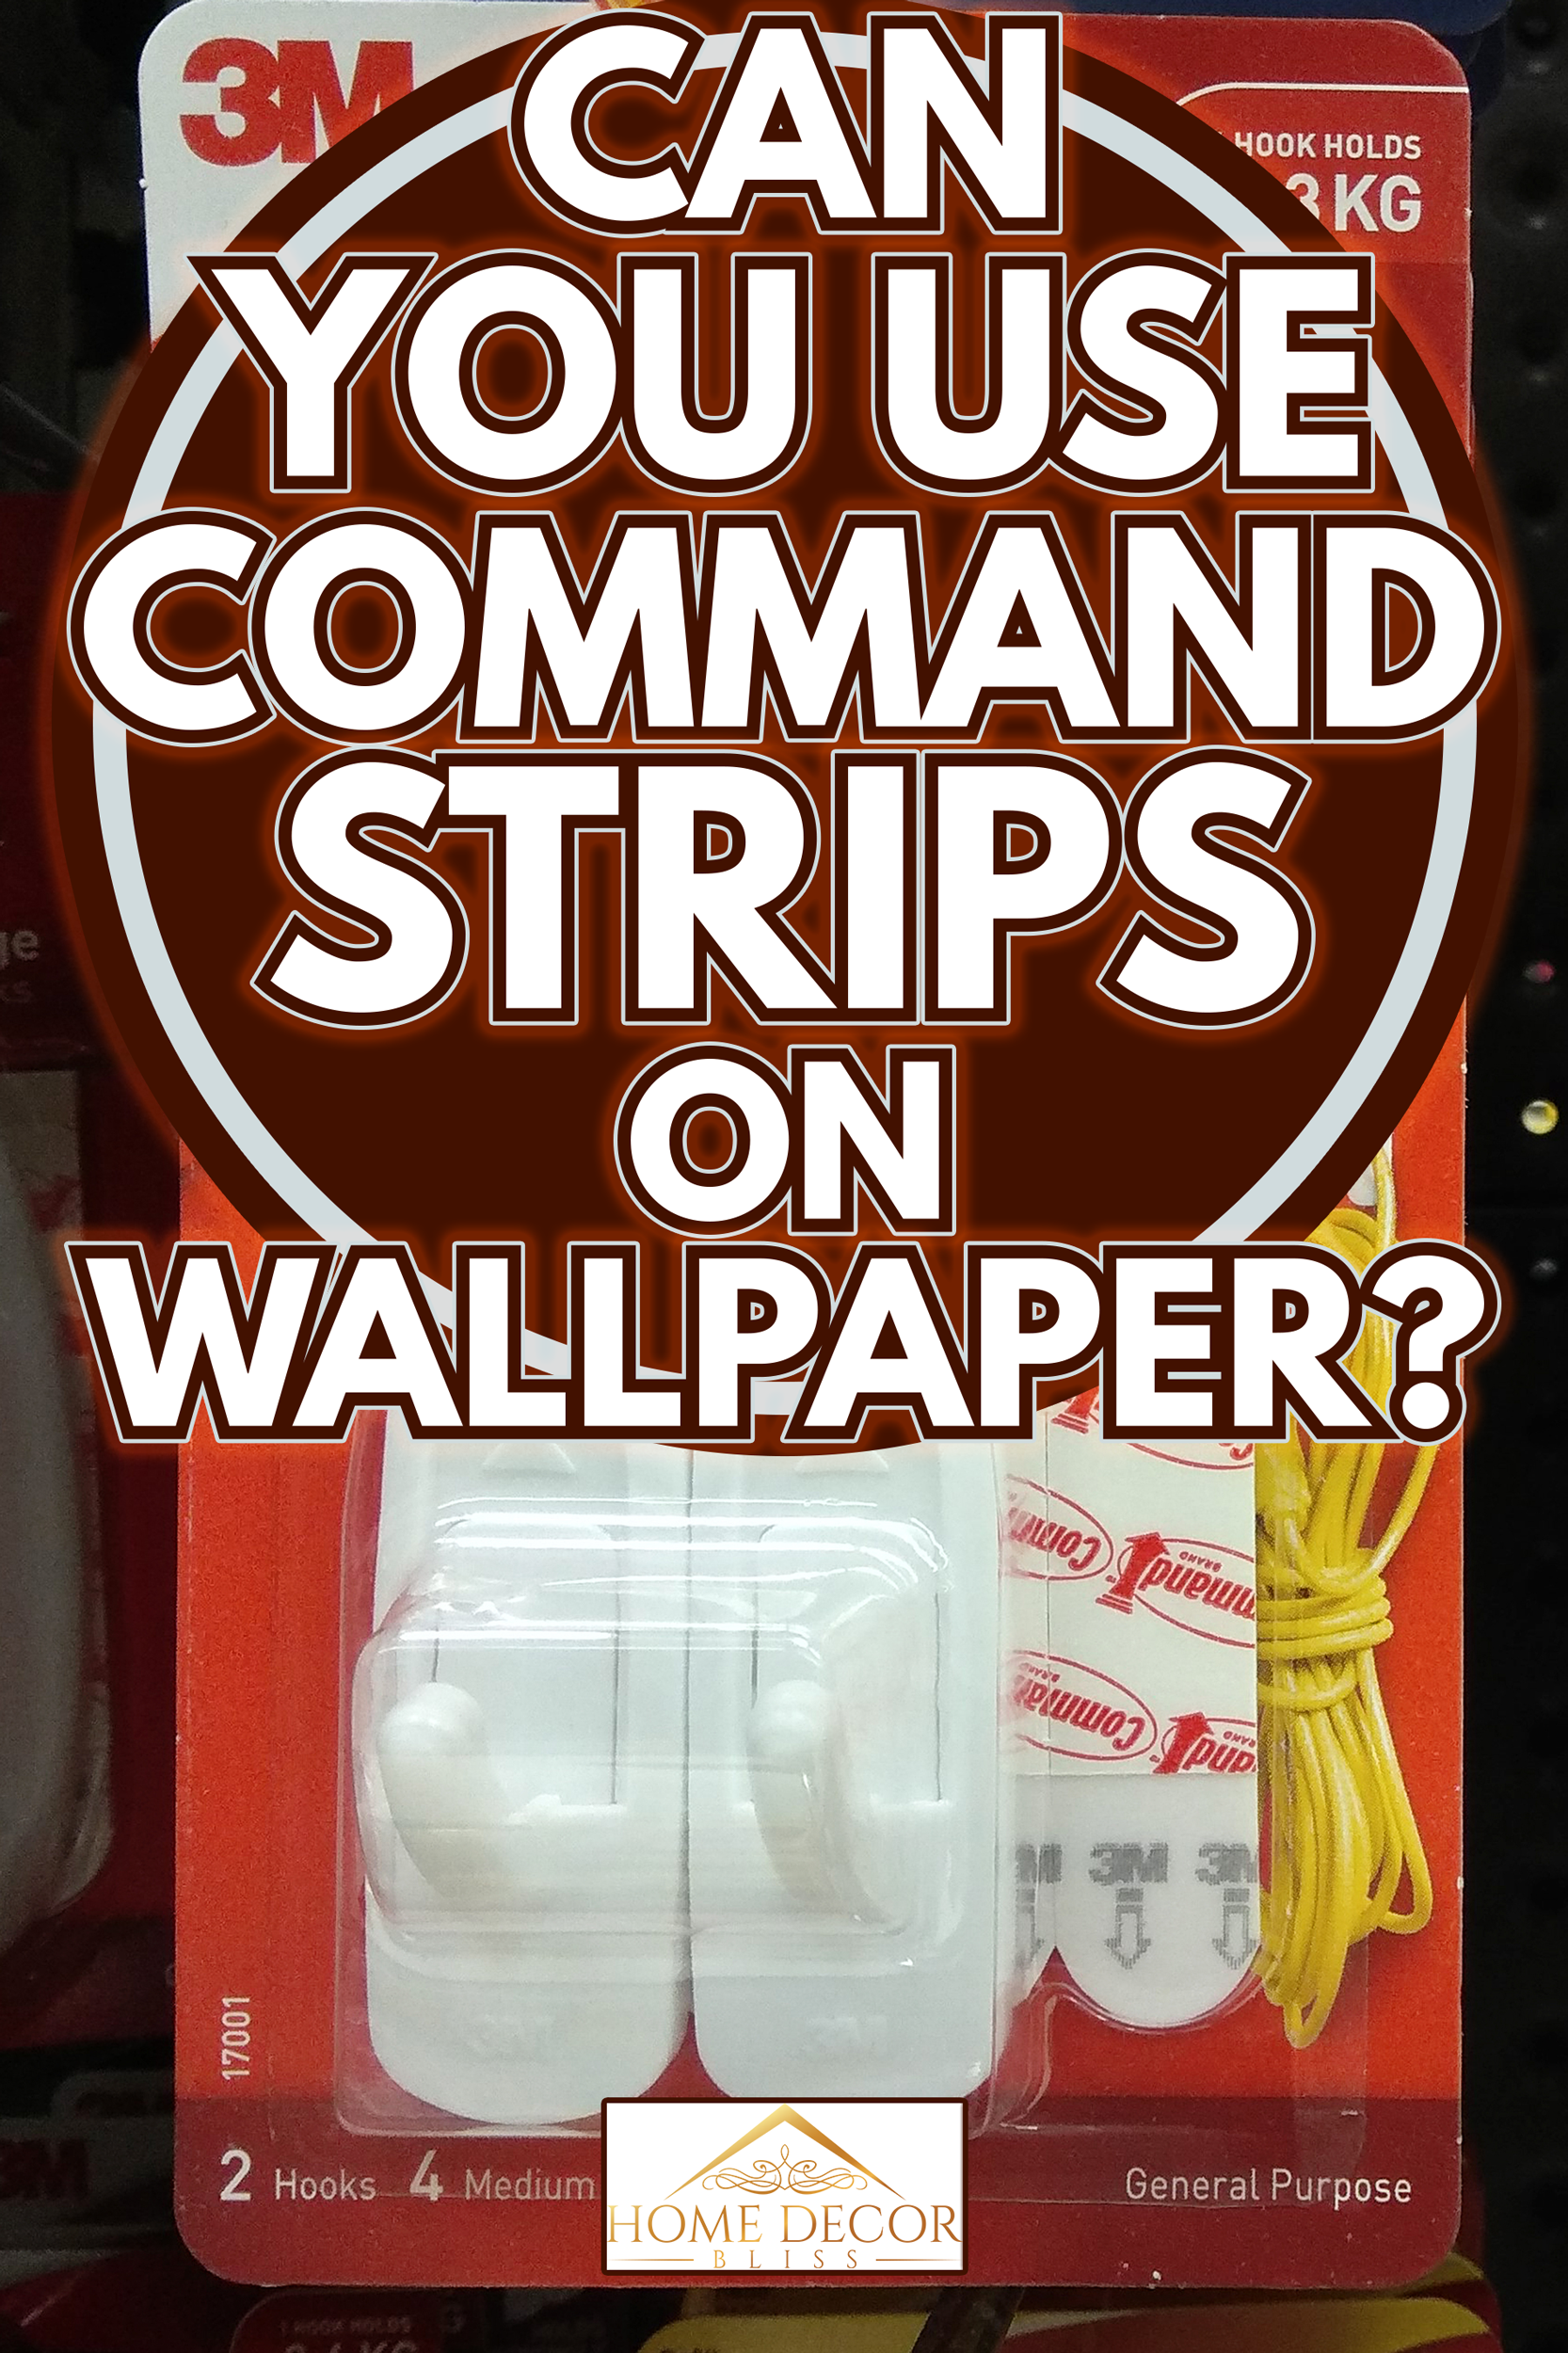 Row of Command brand Picture Hanging Strips and Hooks by 3M company on store shelf. 3M is the general public primarily known for the Post-it Notes and Scotch Tapes.. - Can You Use Command Strips On Wallpaper